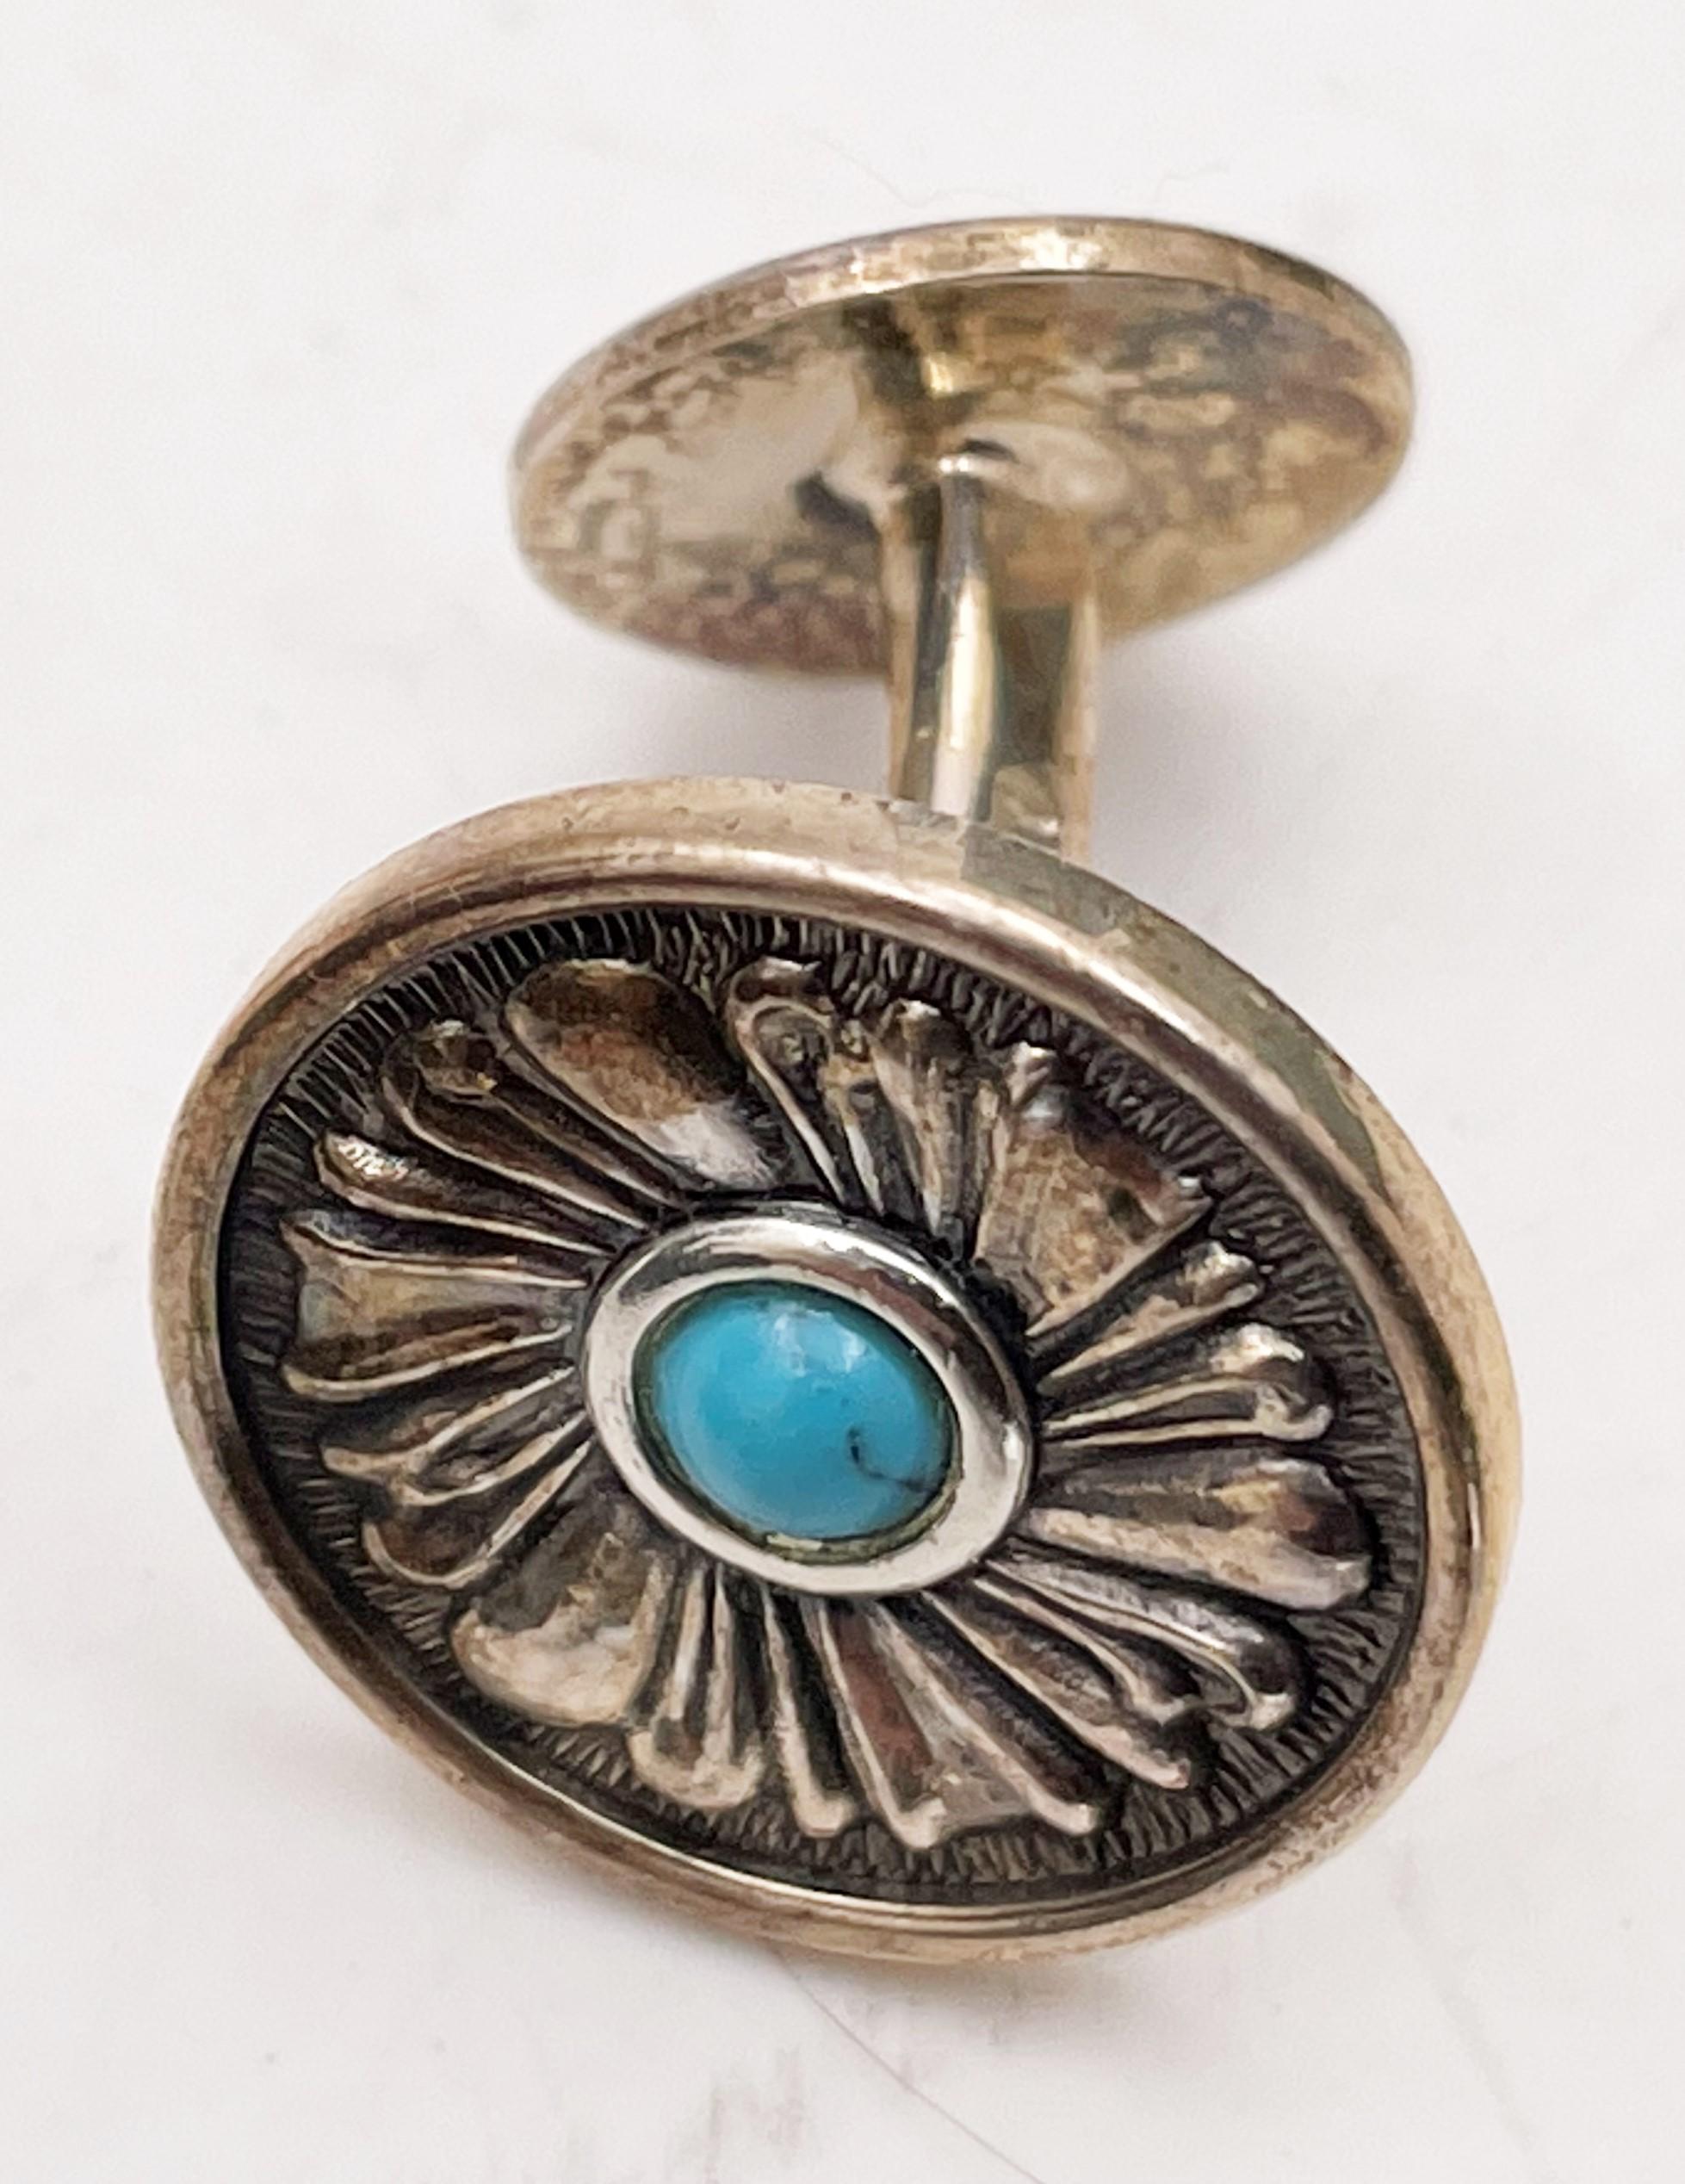 Gianmaria Buccellati, Italian, pair of sterling silver cufflinks with turquoise at the center, in a beautiful floral motif, measuring 2/3'' in diameter, and bearing hallmarks. Sold in its original box, never used. 

Mario Buccellati, the founder